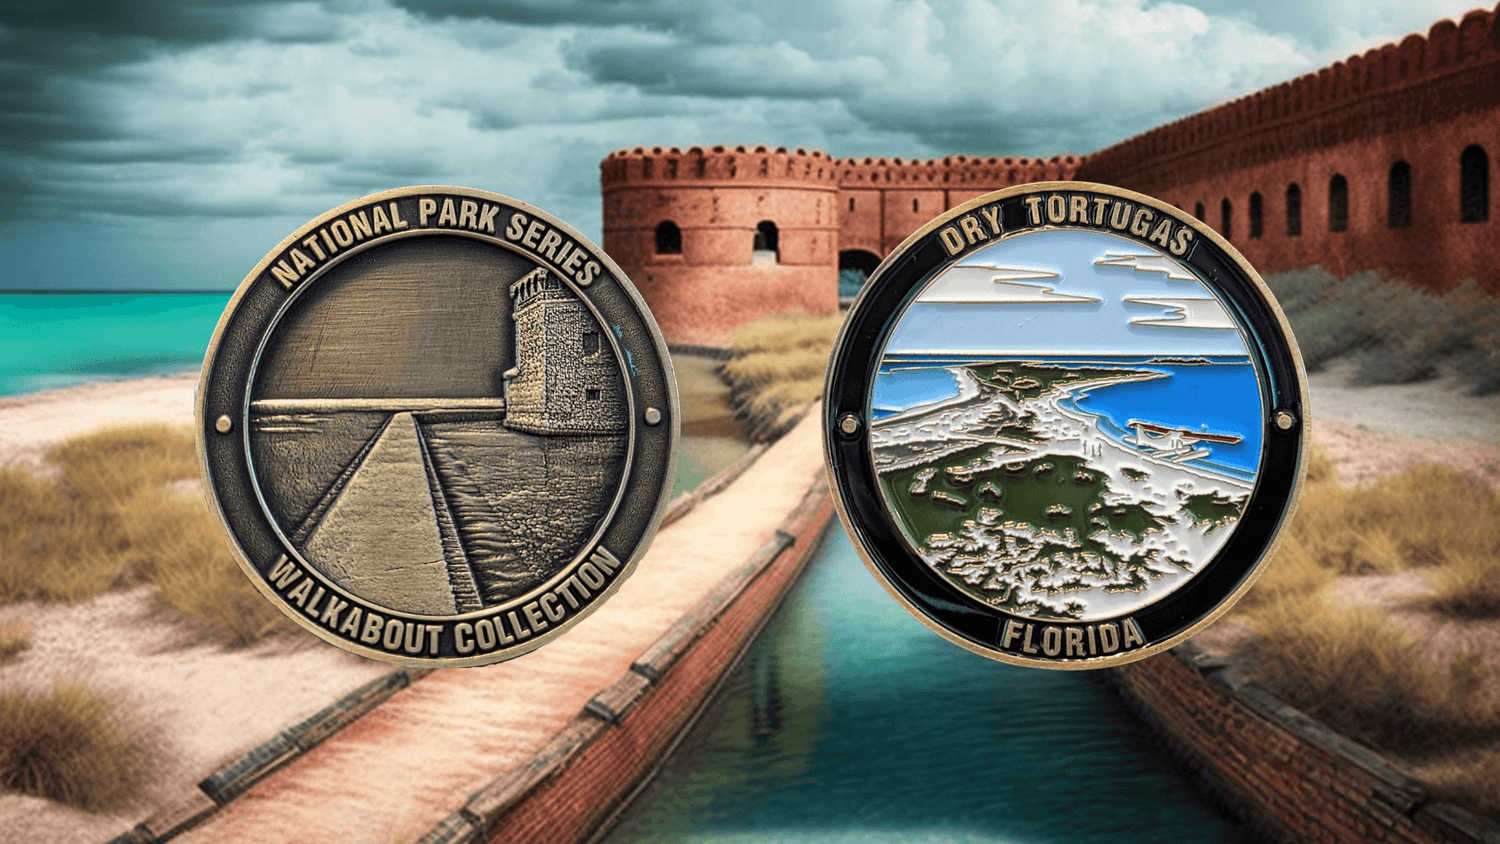 DRY TORTUGAS NATIONAL PARK CHALLENGE COIN